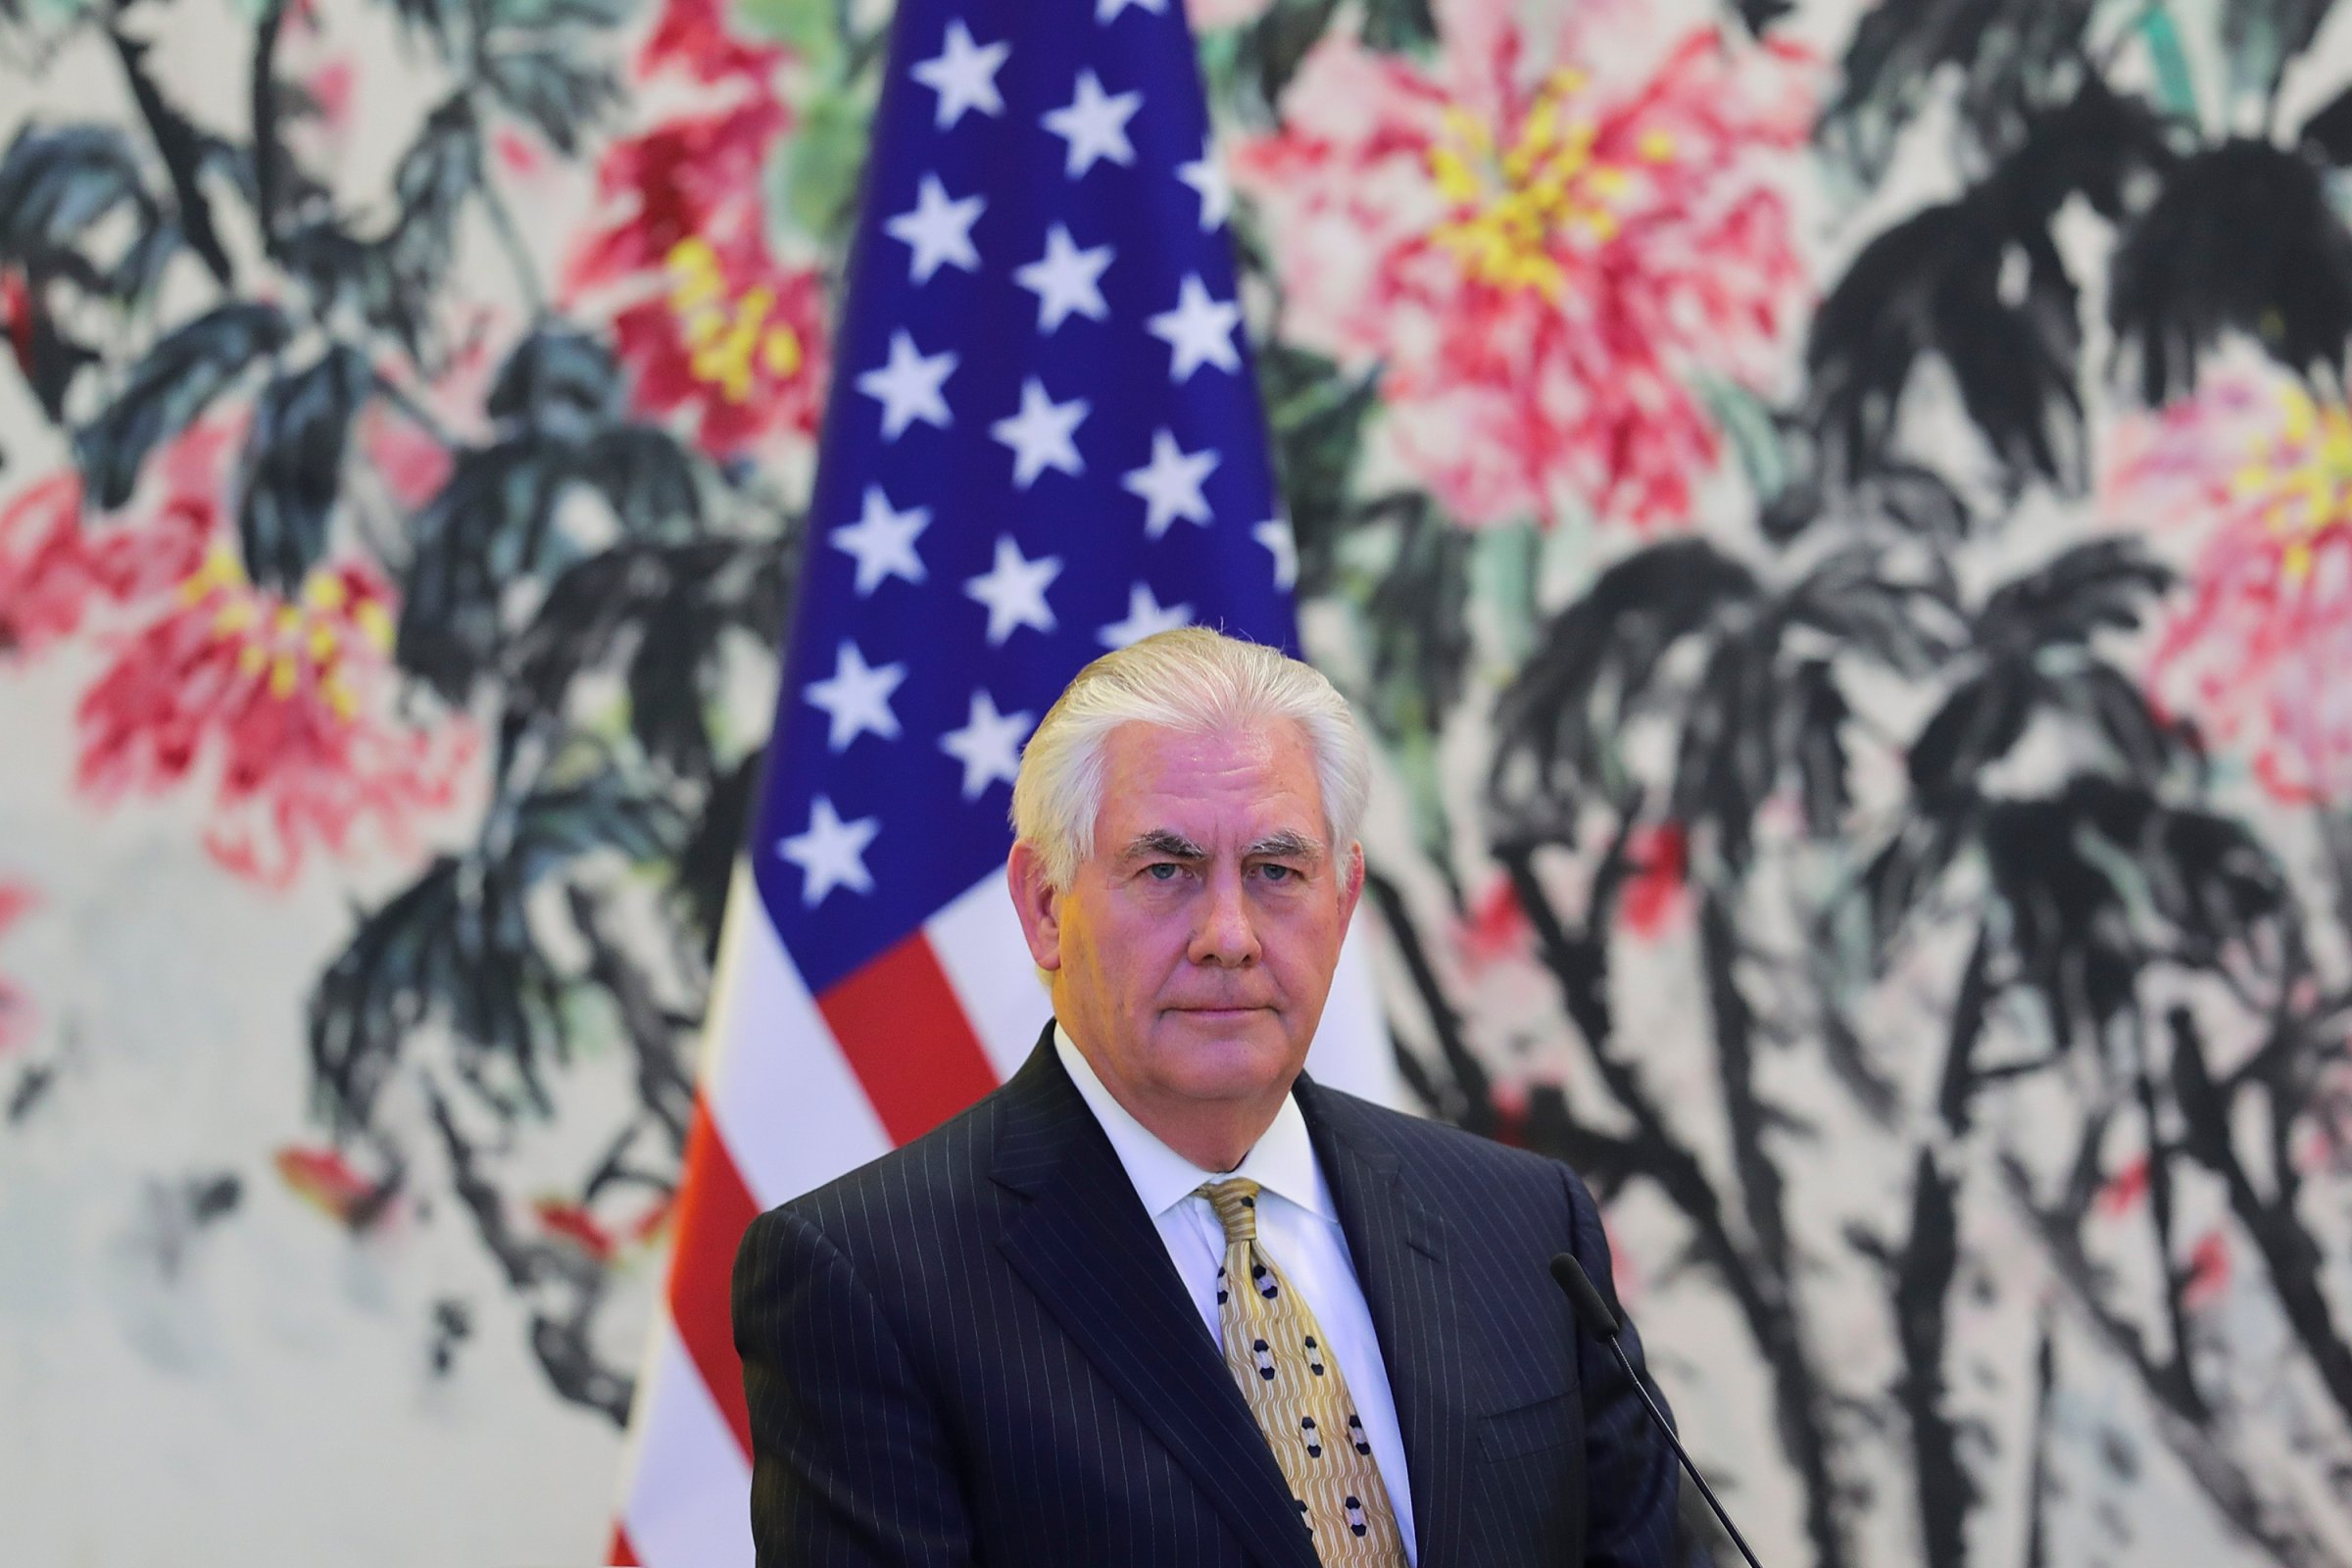 U.S. Secretary of State Rex Tillerson looks on during a joint press conference with Chinese Foreign Minister Wang Yi (not pictured) at Diaoyutai State Guesthouse on March 18, 2017 in Beijing, China. Tillerson is on his first visit to Asia as Secretary of State.